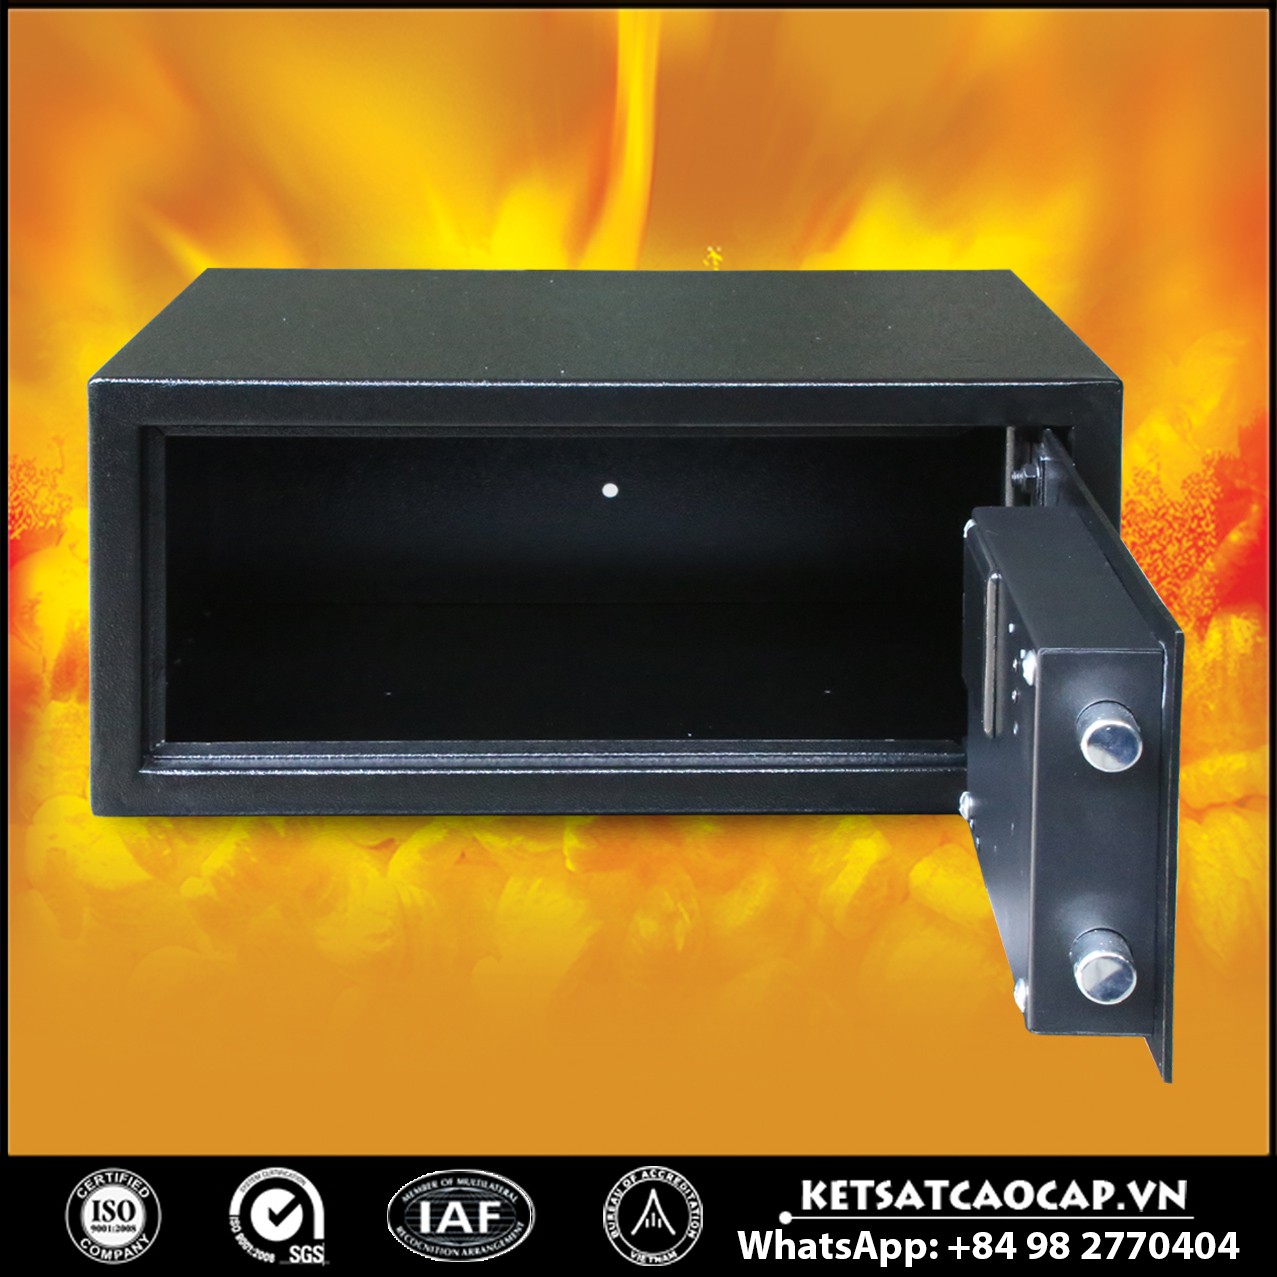 Used Hotel Safes Manufacturers & Suppliers‎